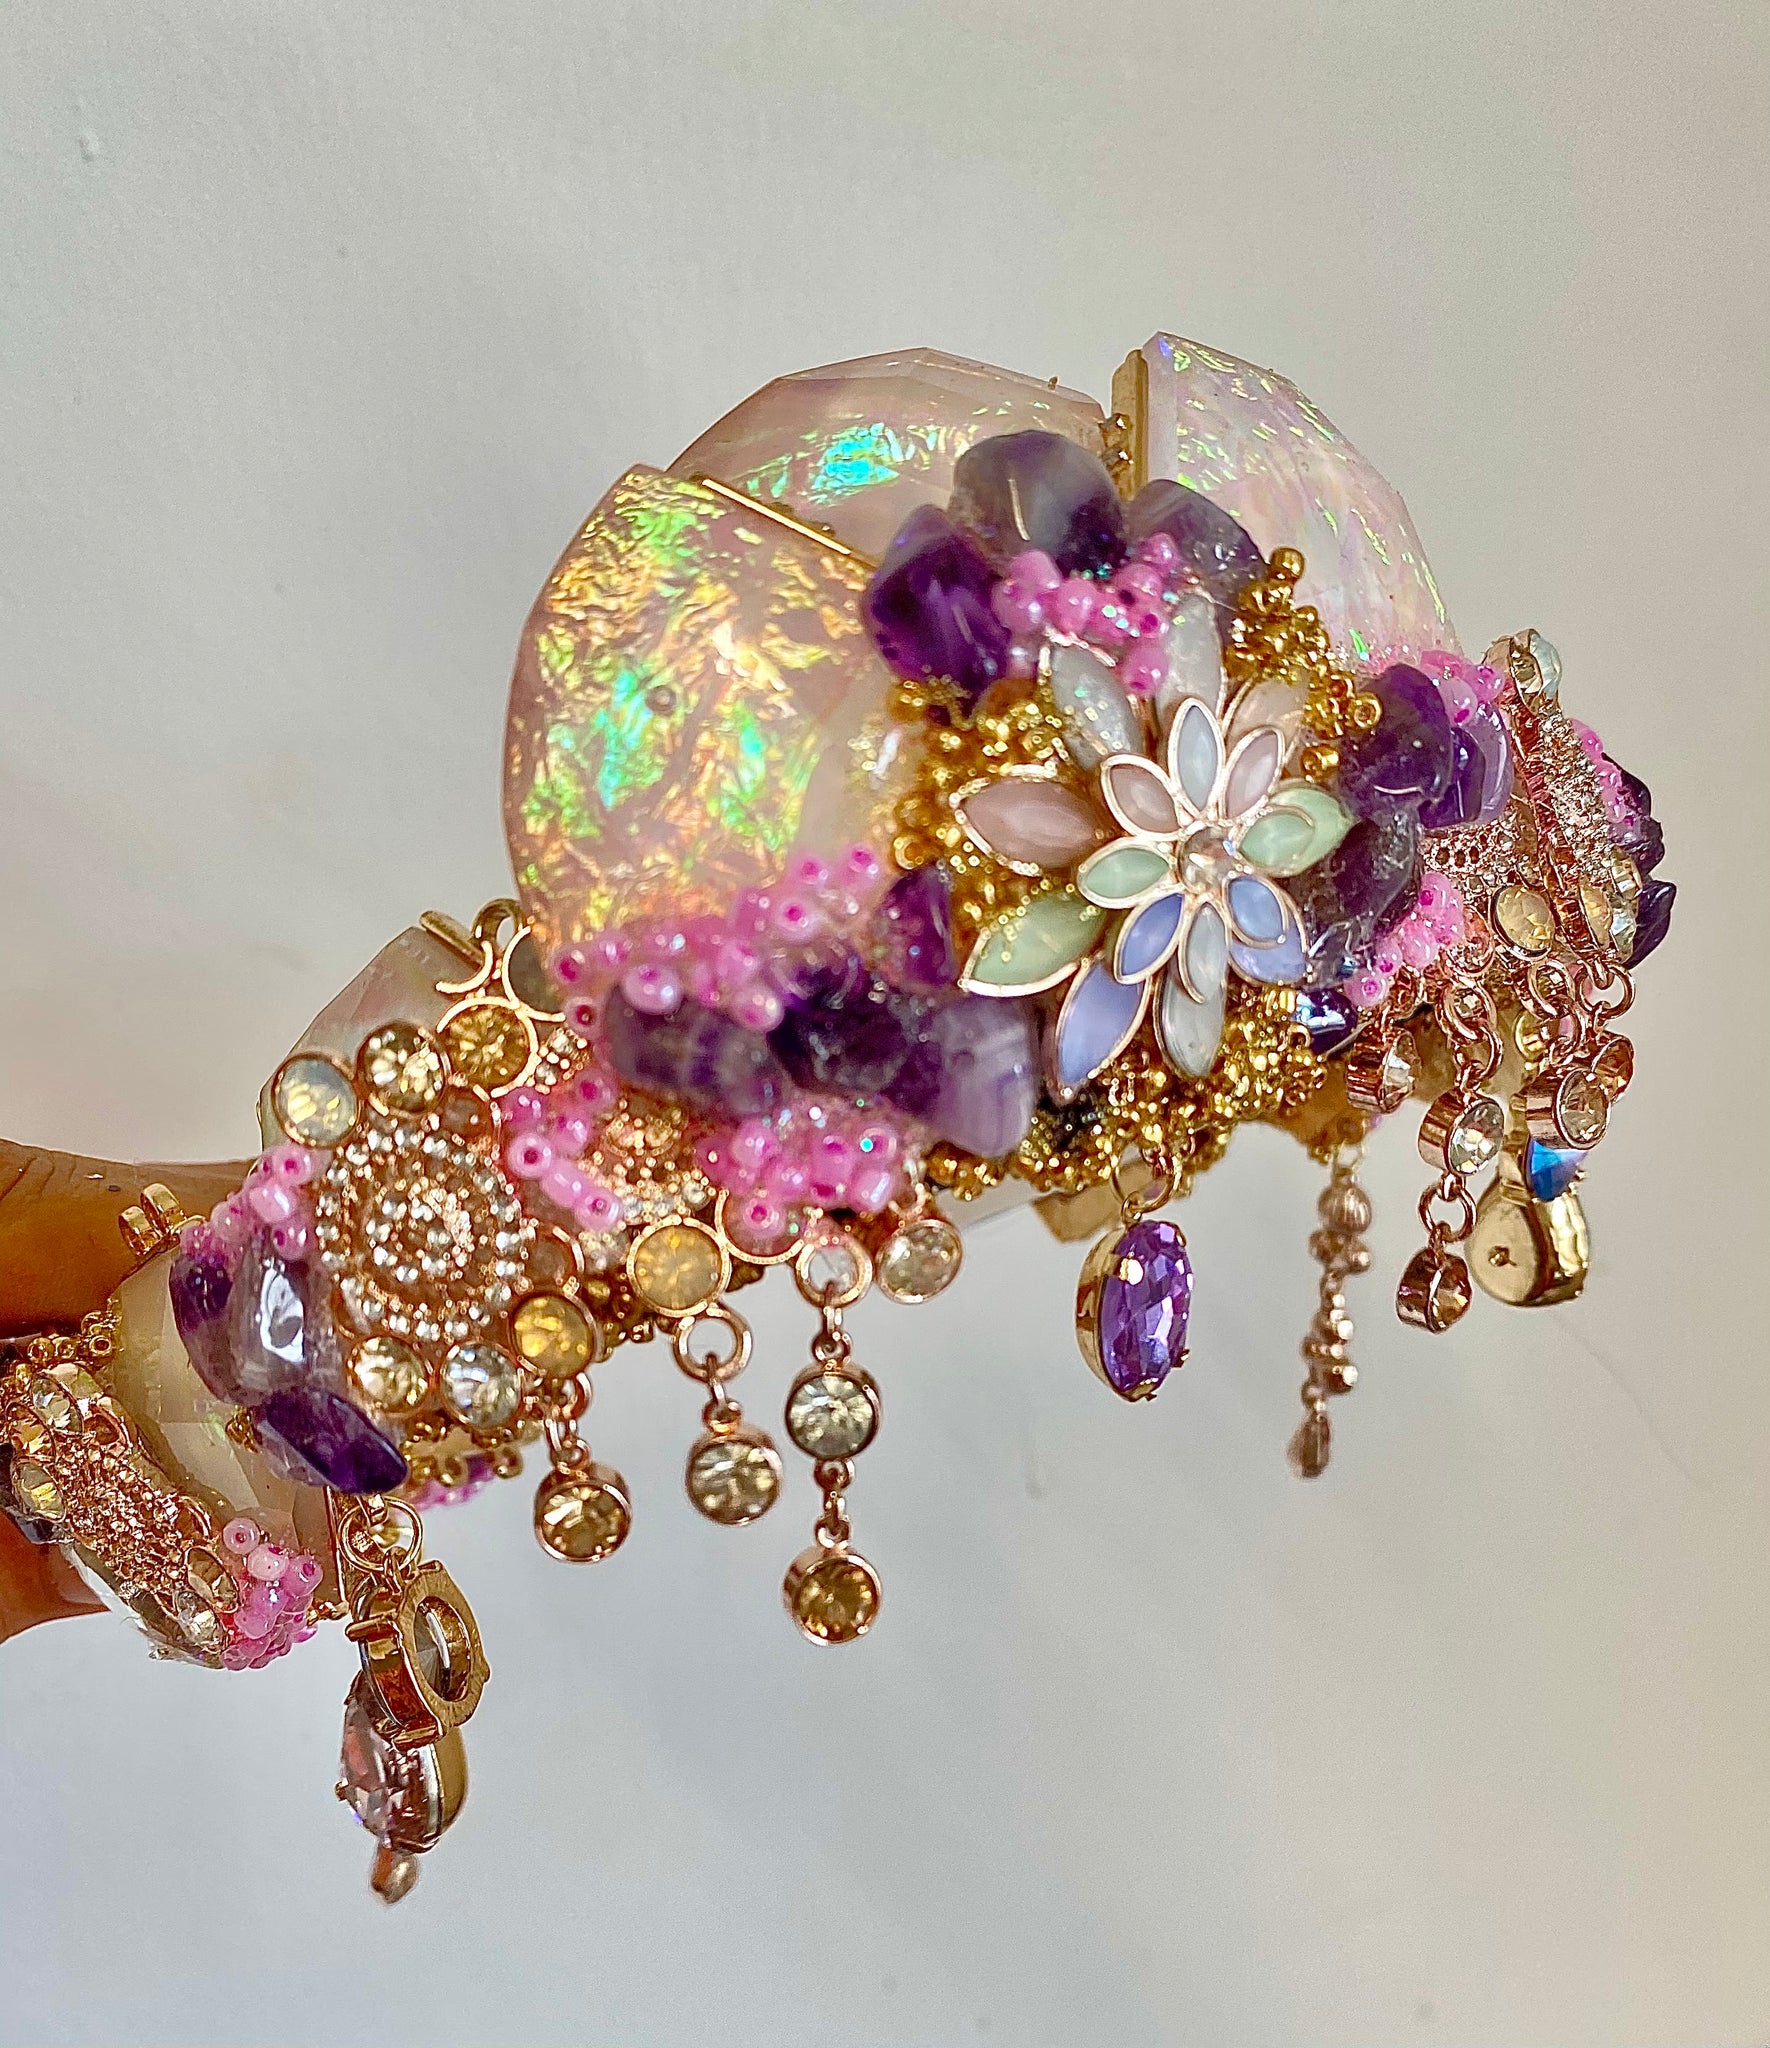 Pink jewel of the sea crown ~ Ready to ship